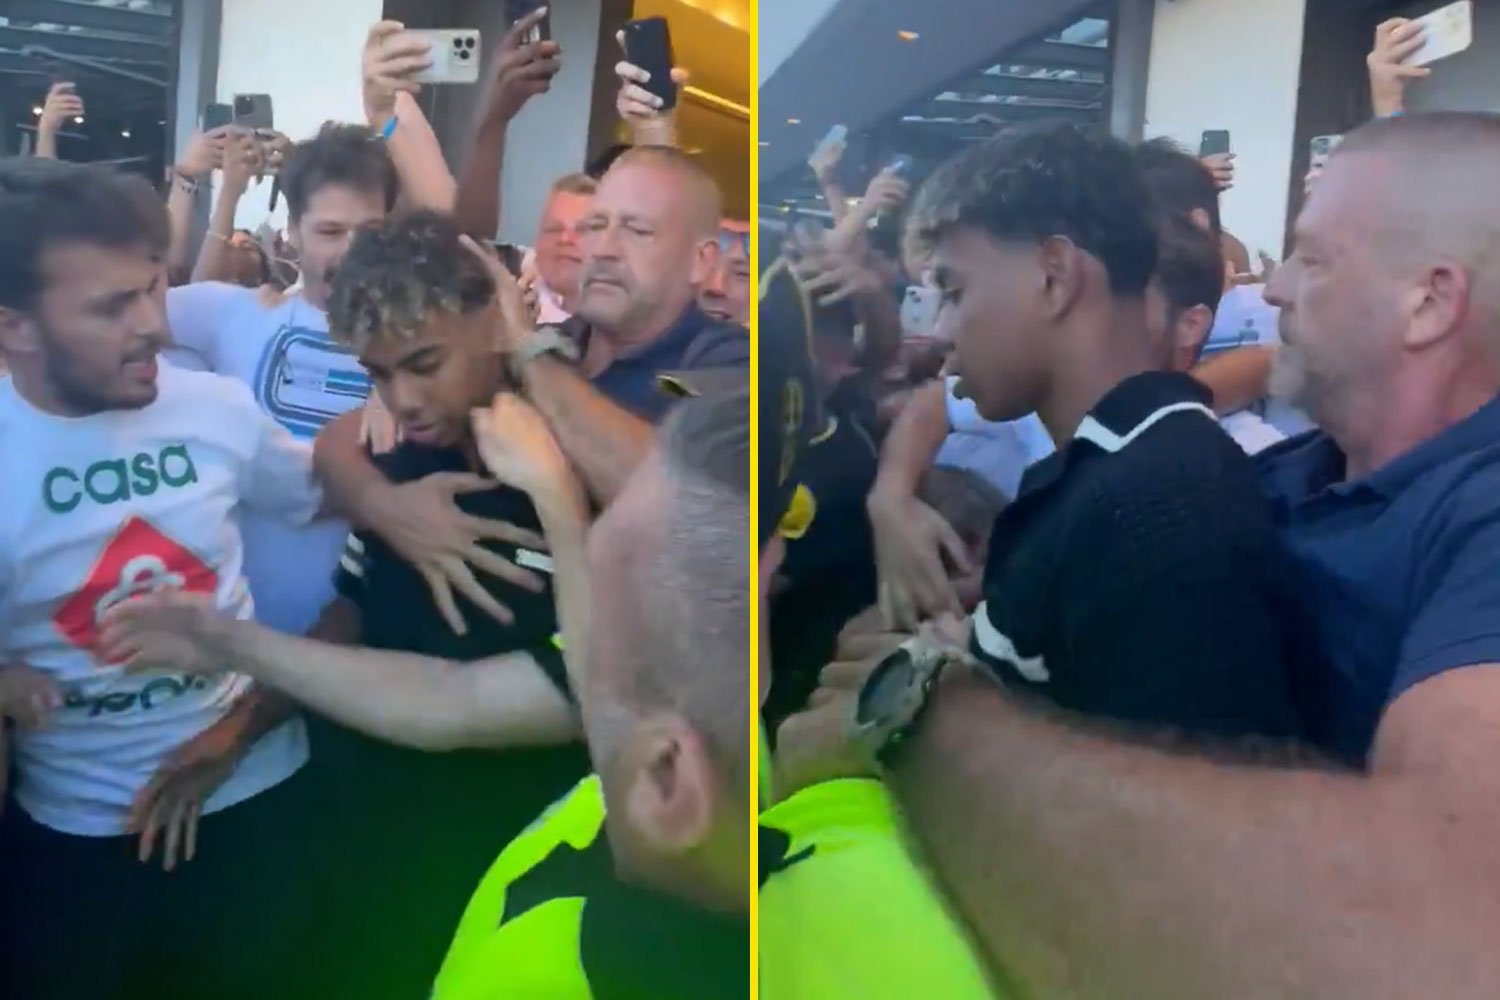 Security struggle to keep fans back as Lamine Yamal is mobbed at airport in Spain